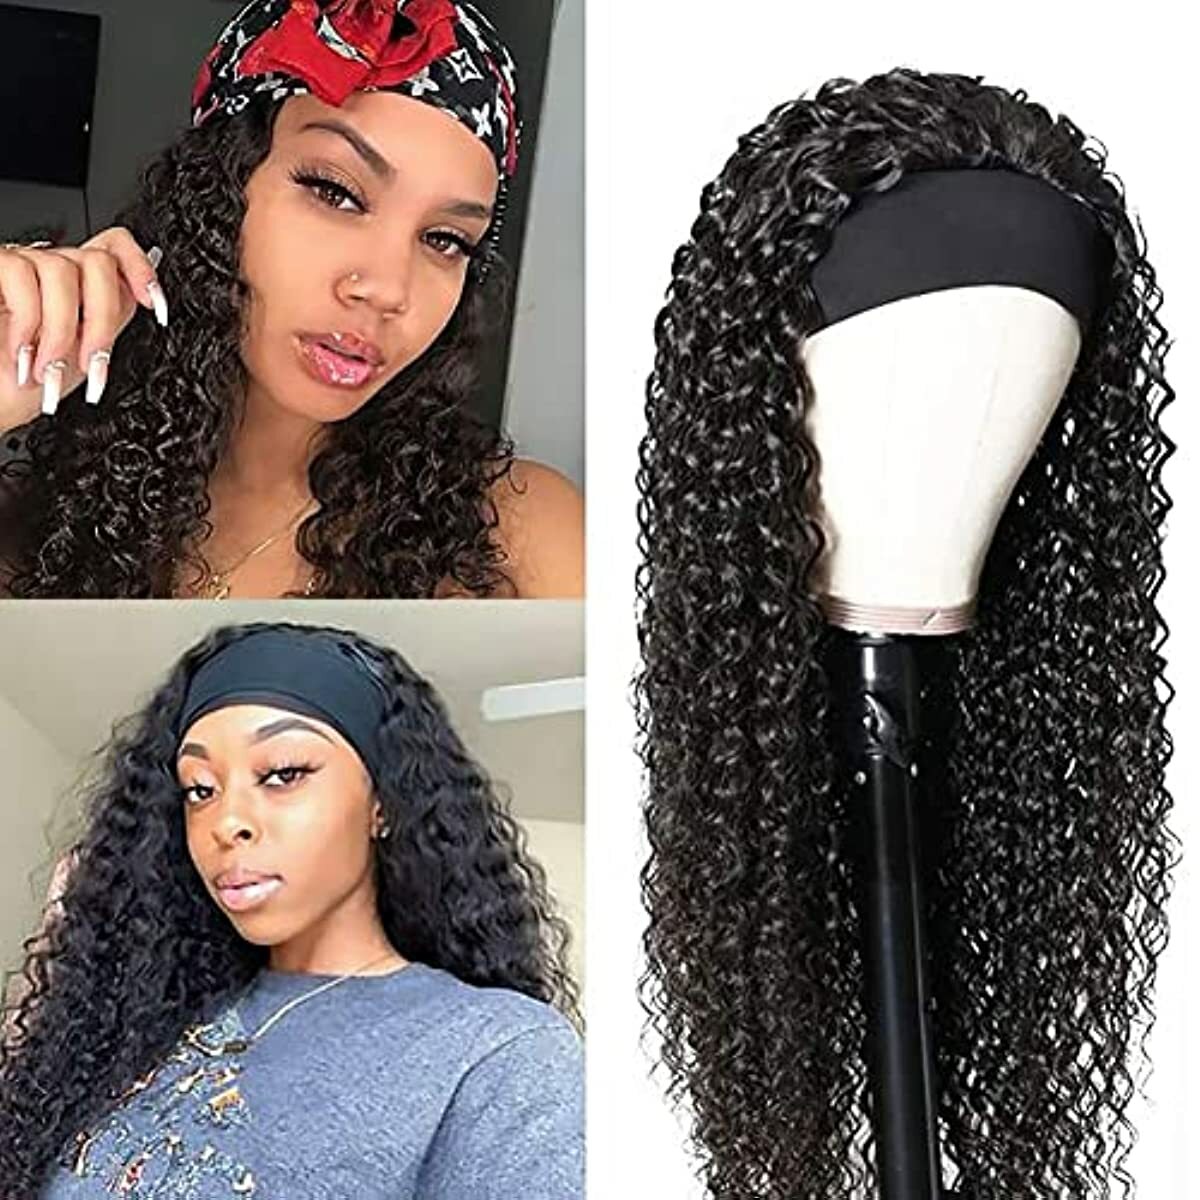 XSY Headband Wigs Human Hair Deep Wave 16 Inch Wig Glueless Headband Wig Deep Wave None Lace Front Wigs Human Hair for Black Women 150% Density Wig Curly Hair Natural Color